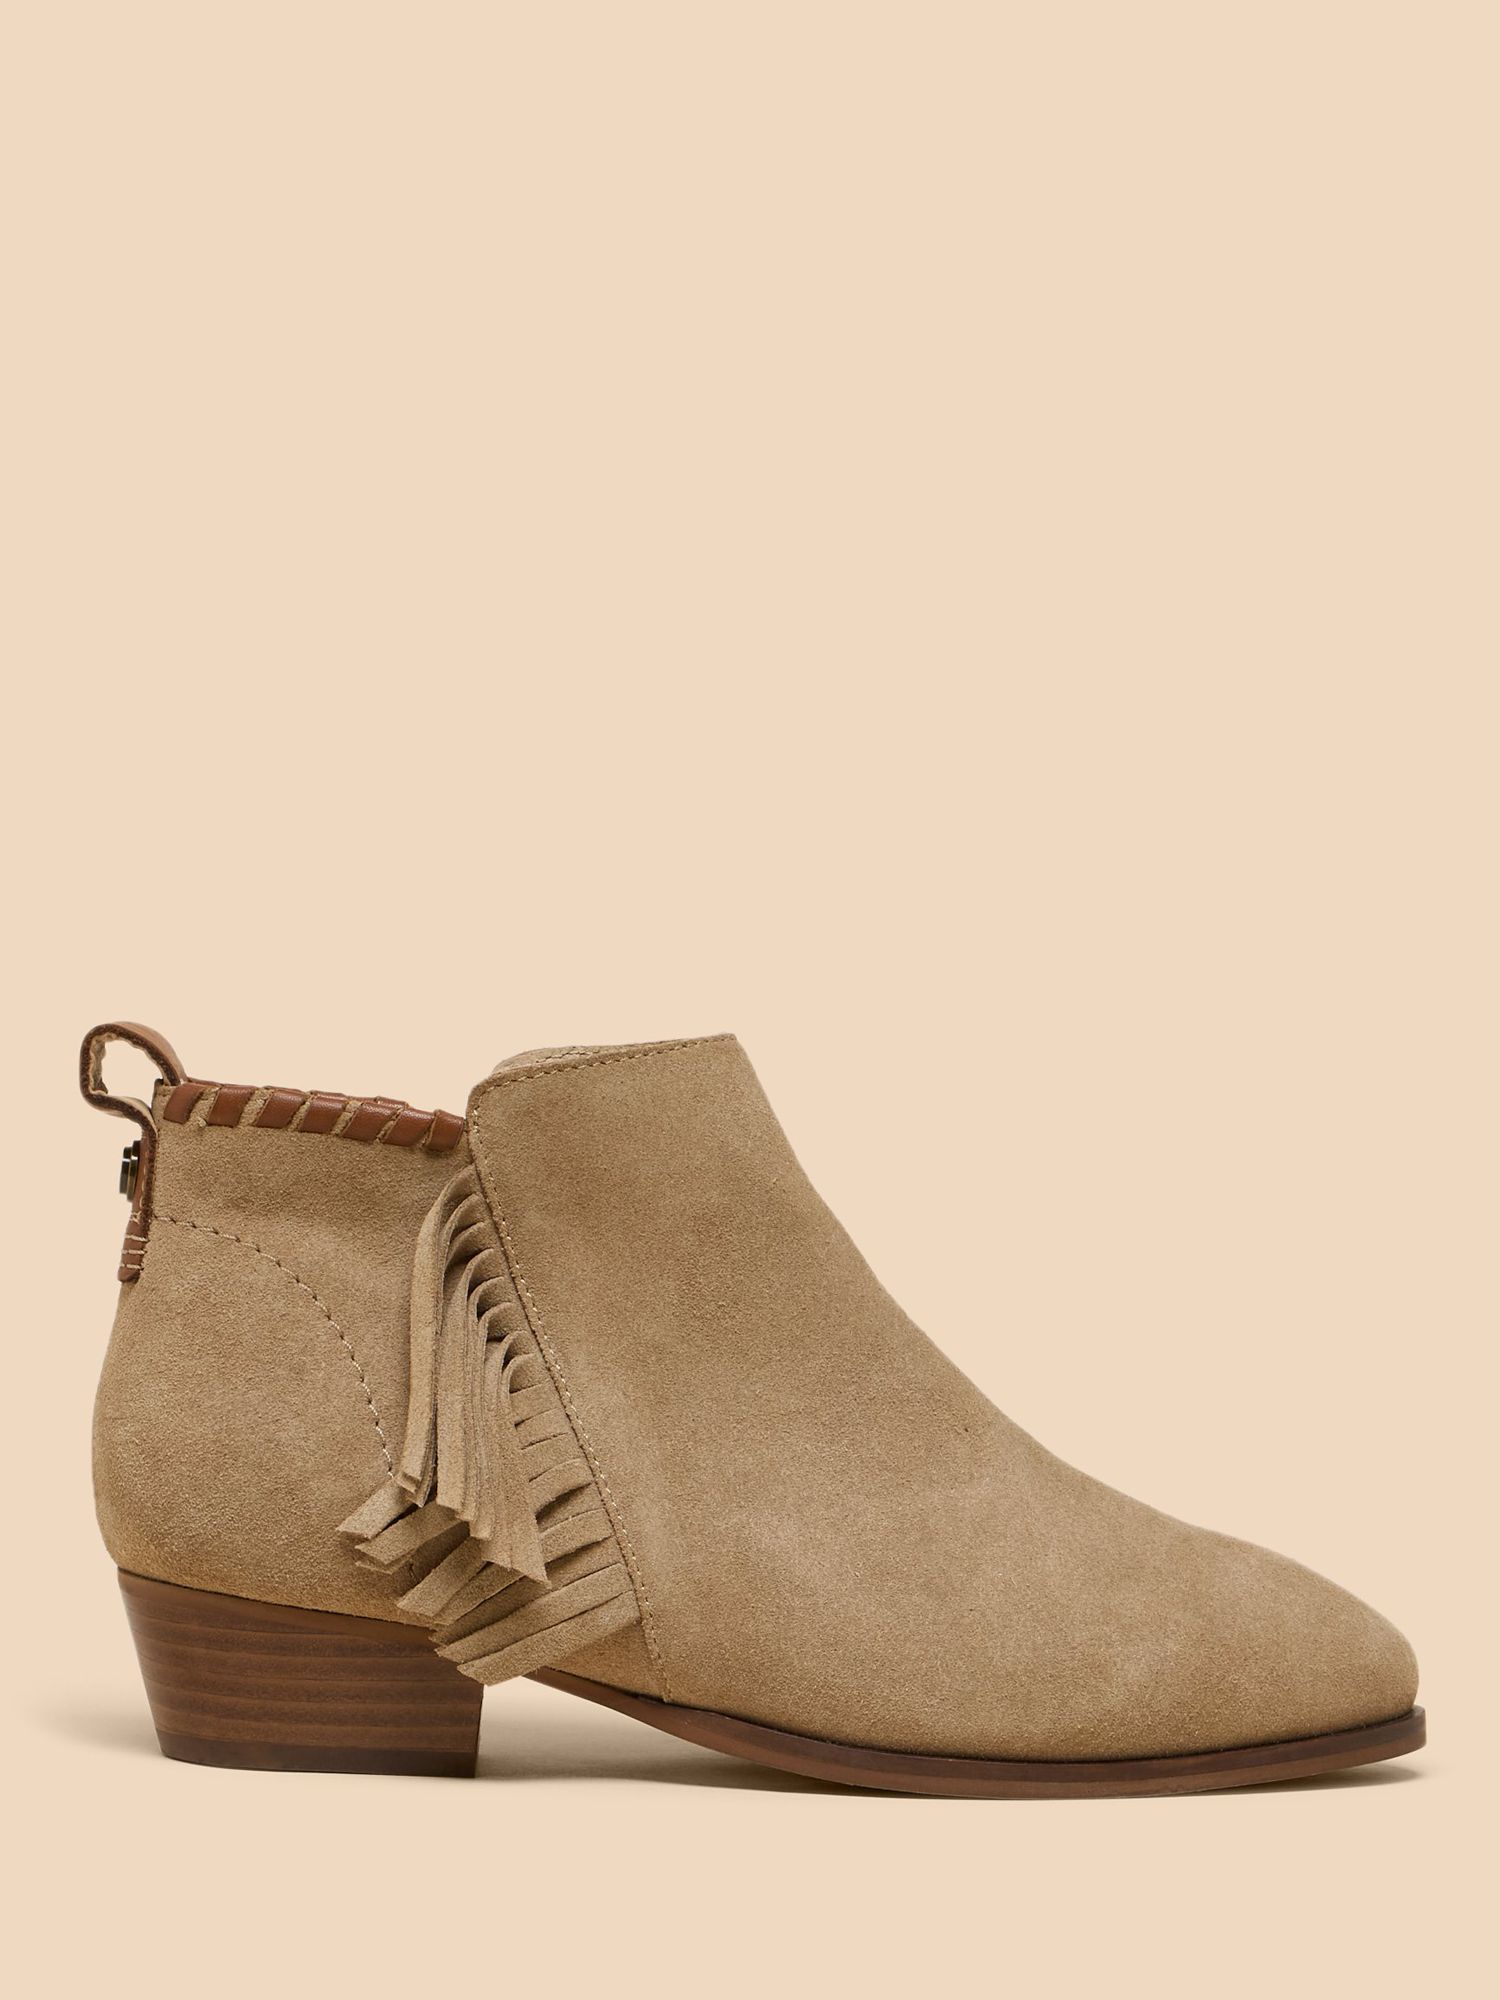 White Stuff  Acacia Suede Fringe Ankle Boots, Light Natural, 3